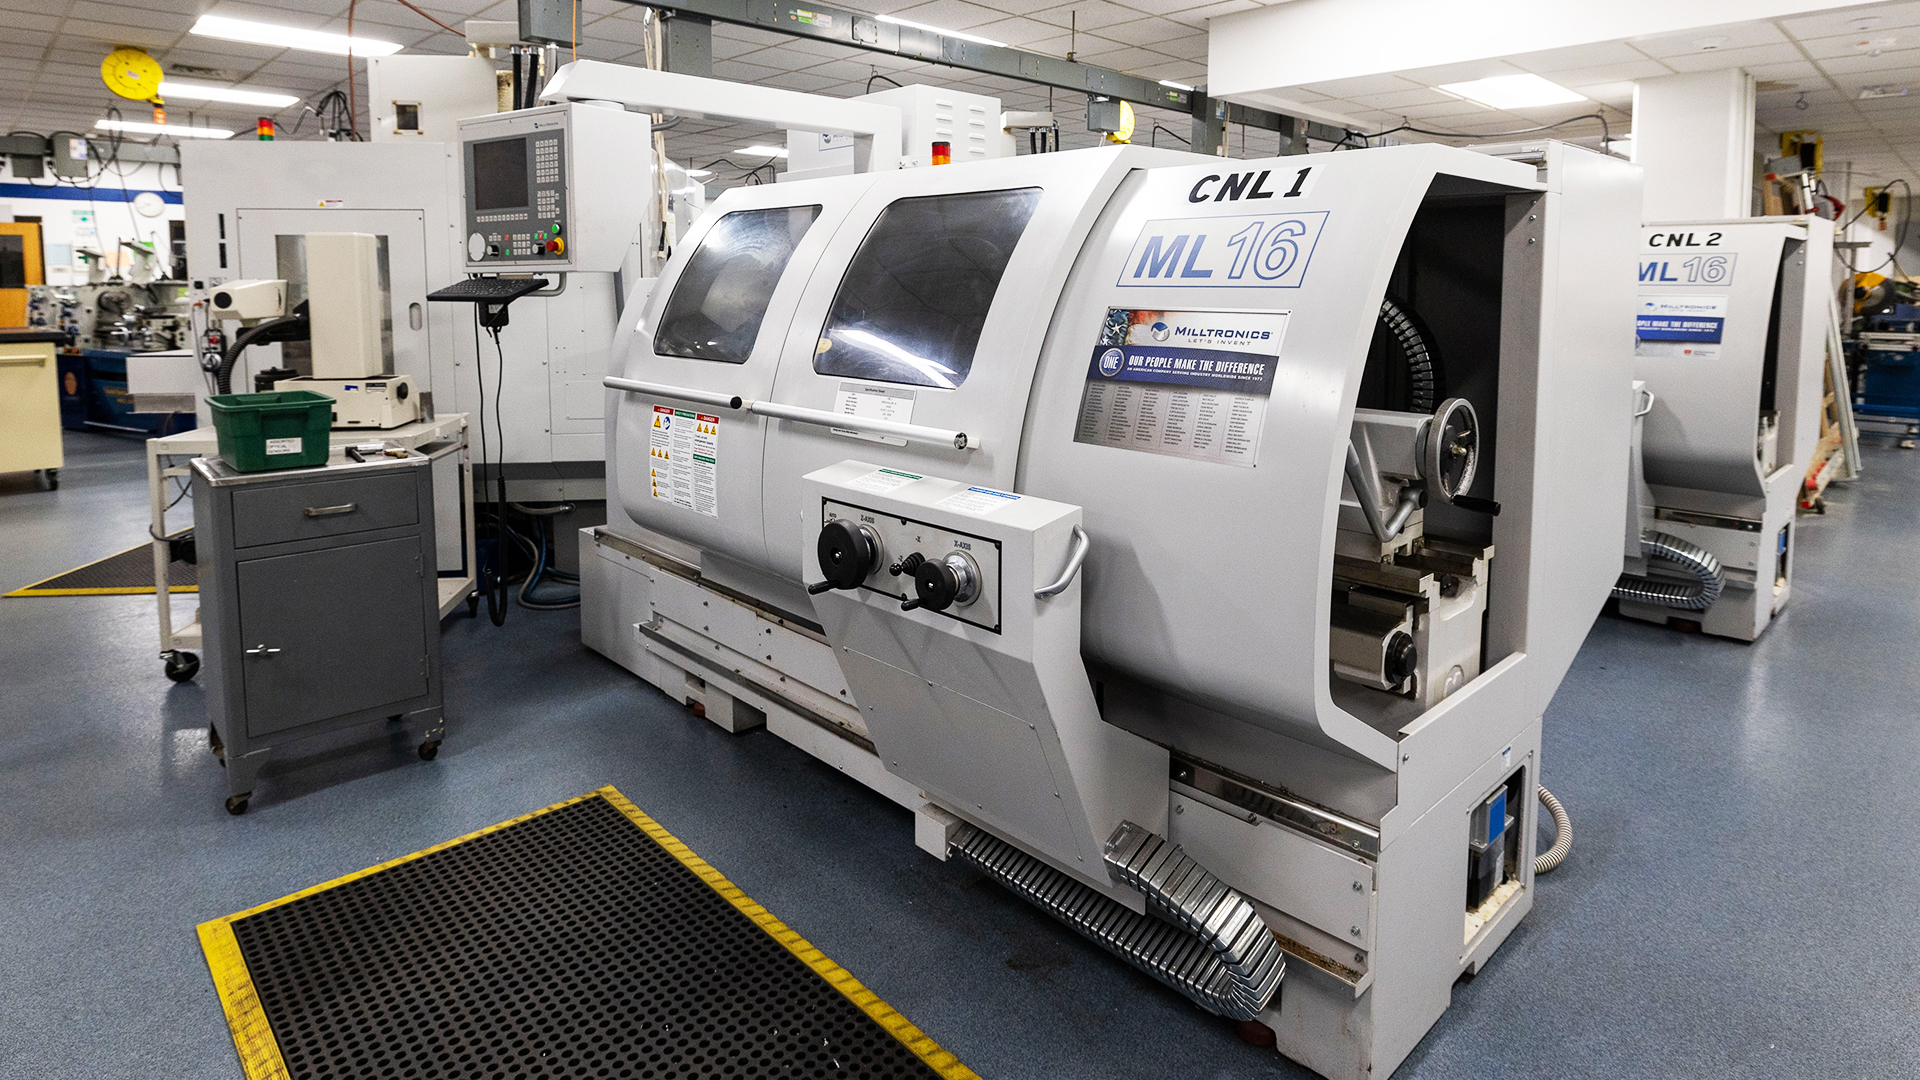 CNC ML16 Lathe in the Metal Forming and Finishing Lab UW-Stout